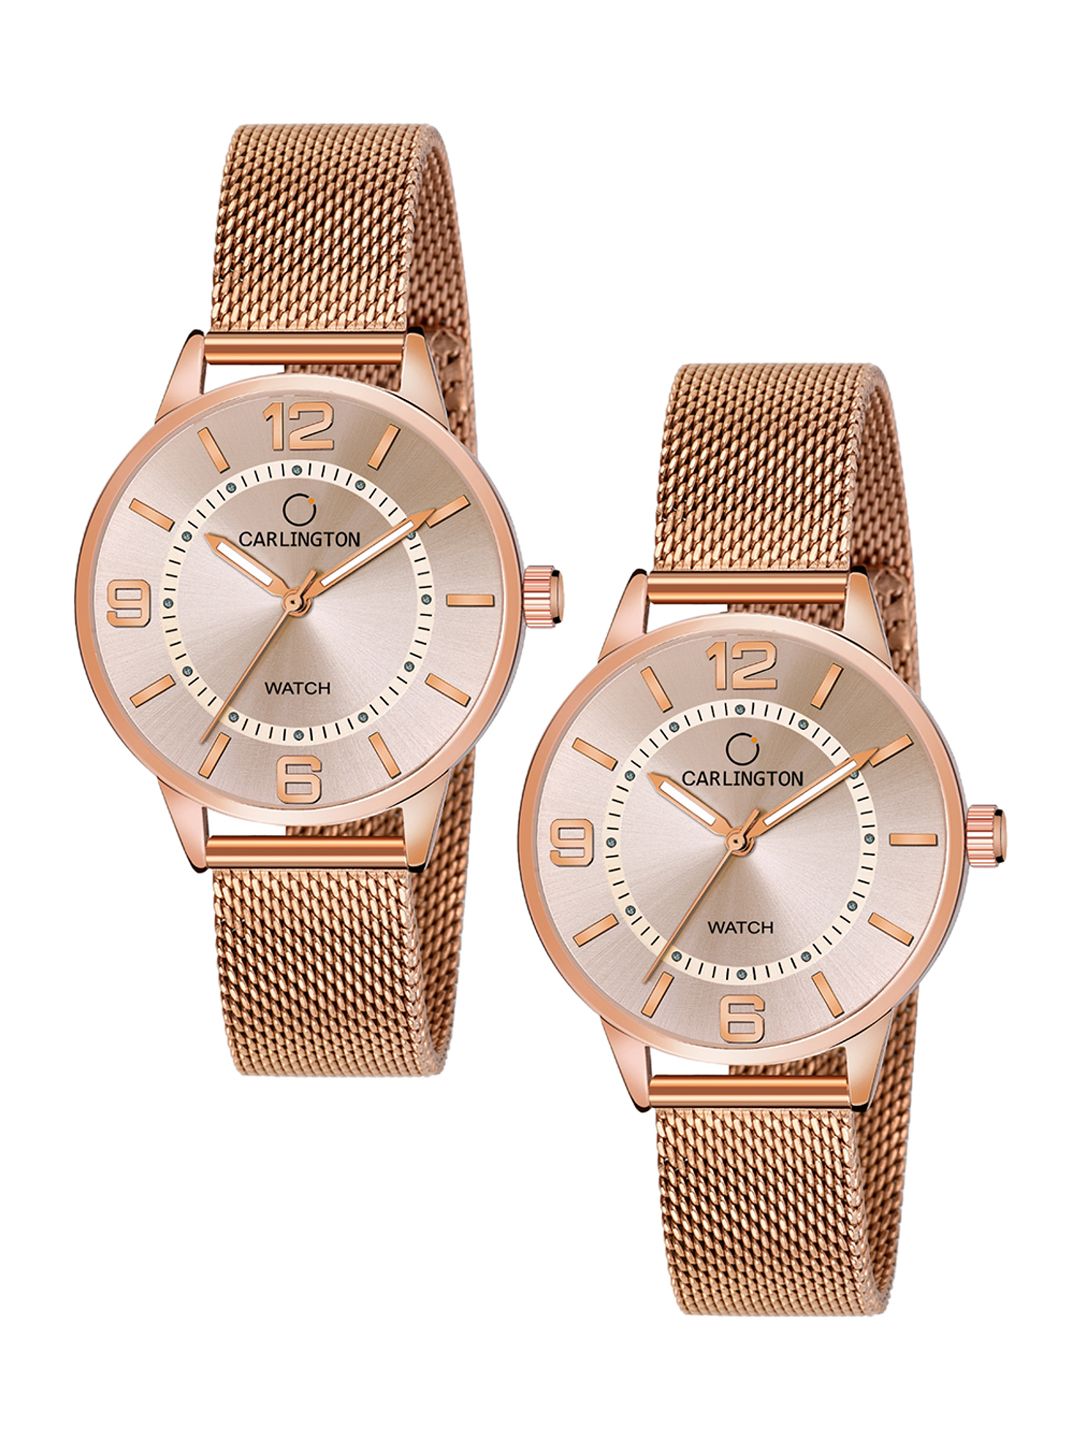 CARLINGTON Women Set of 2 Stainless Steel Bracelet Straps Analogue Watches CT2002 Price in India